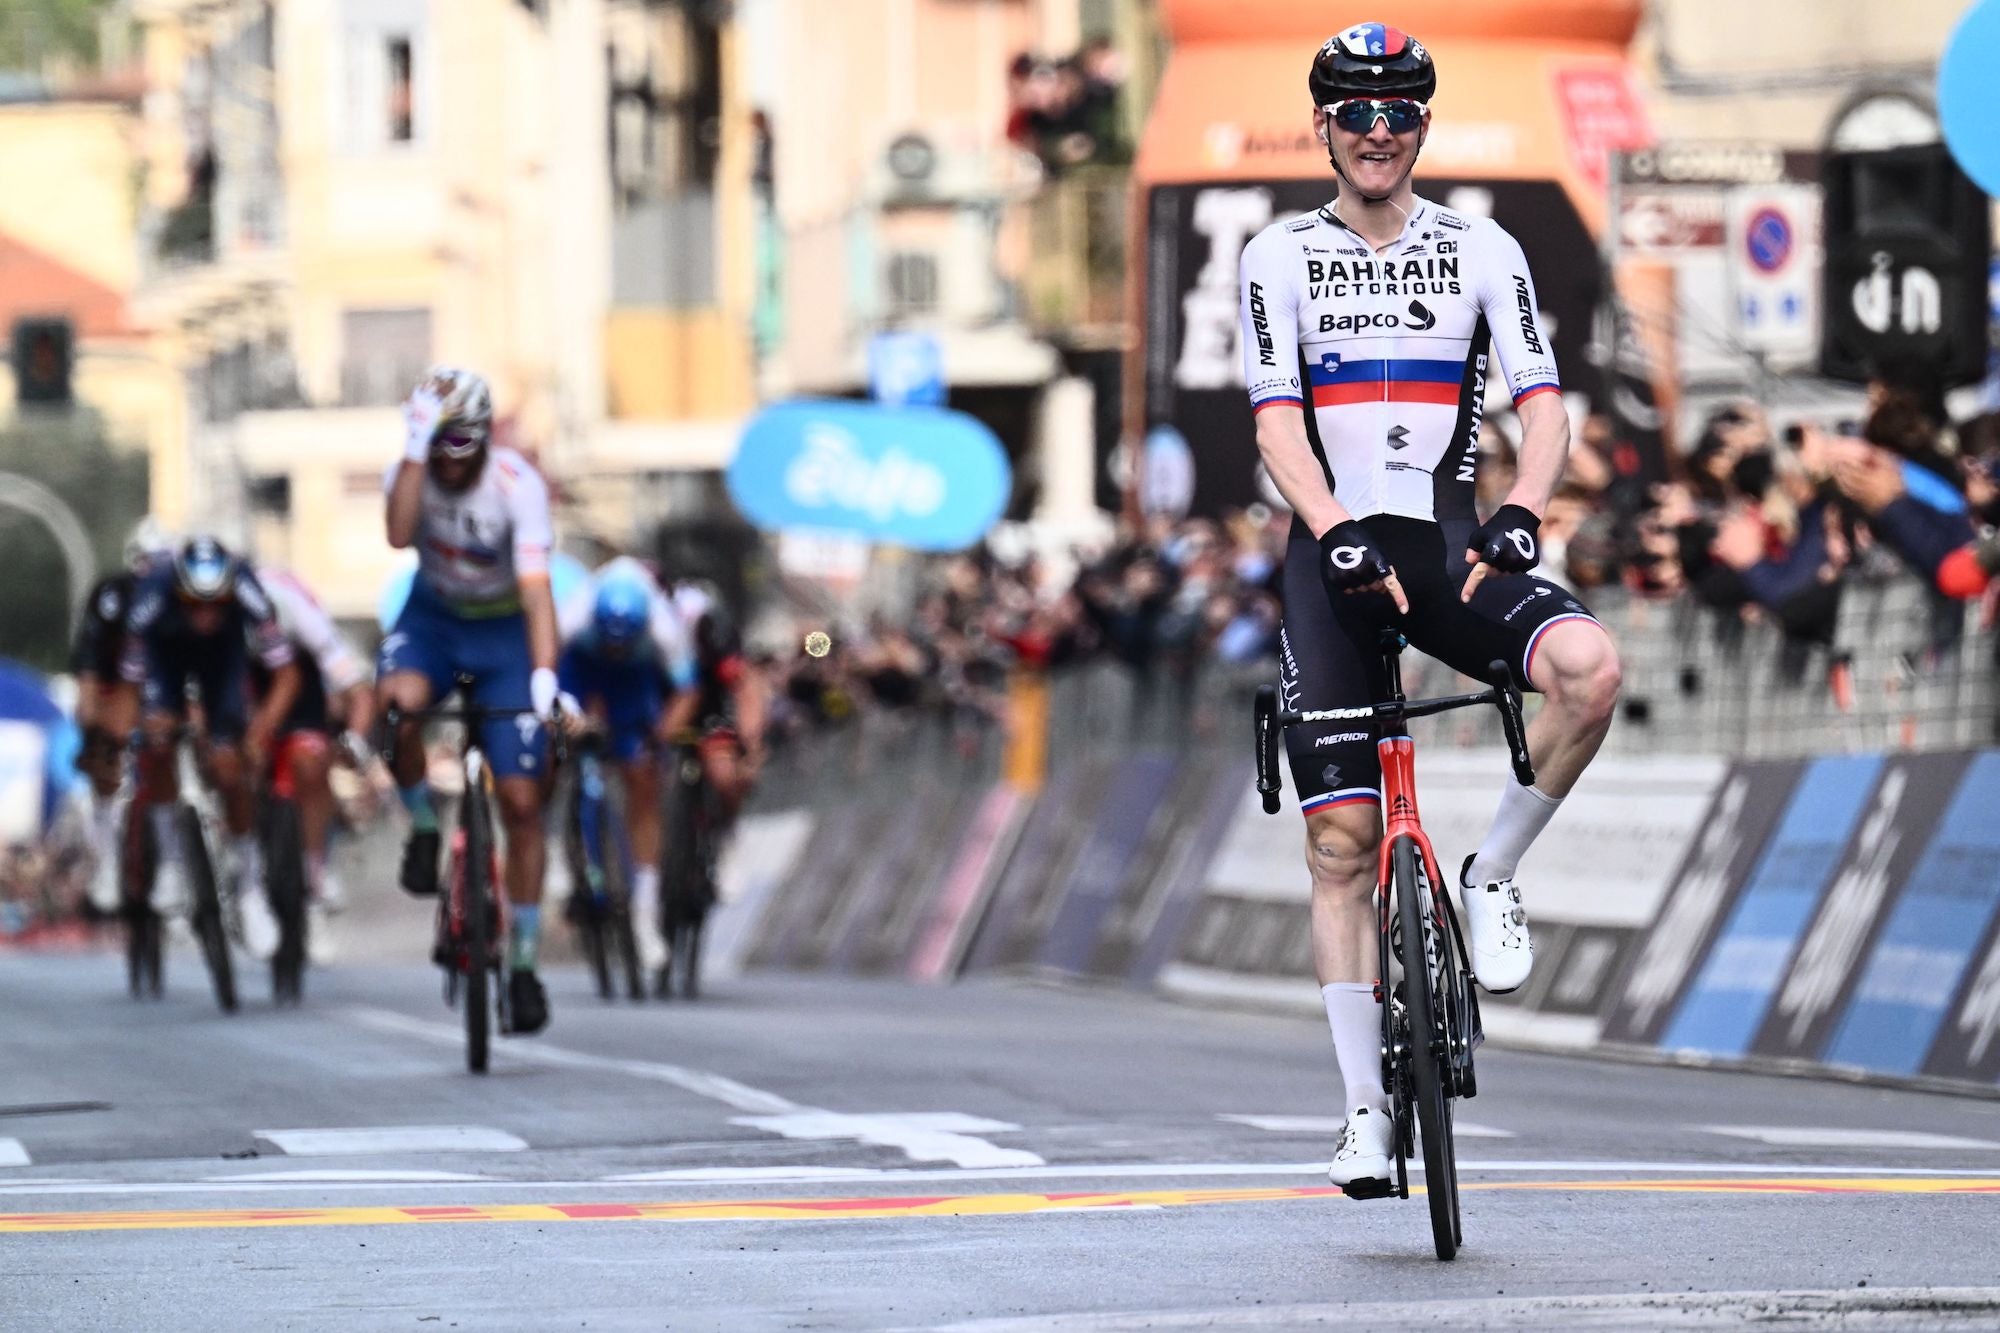 Milan-San Remo Who will win and how